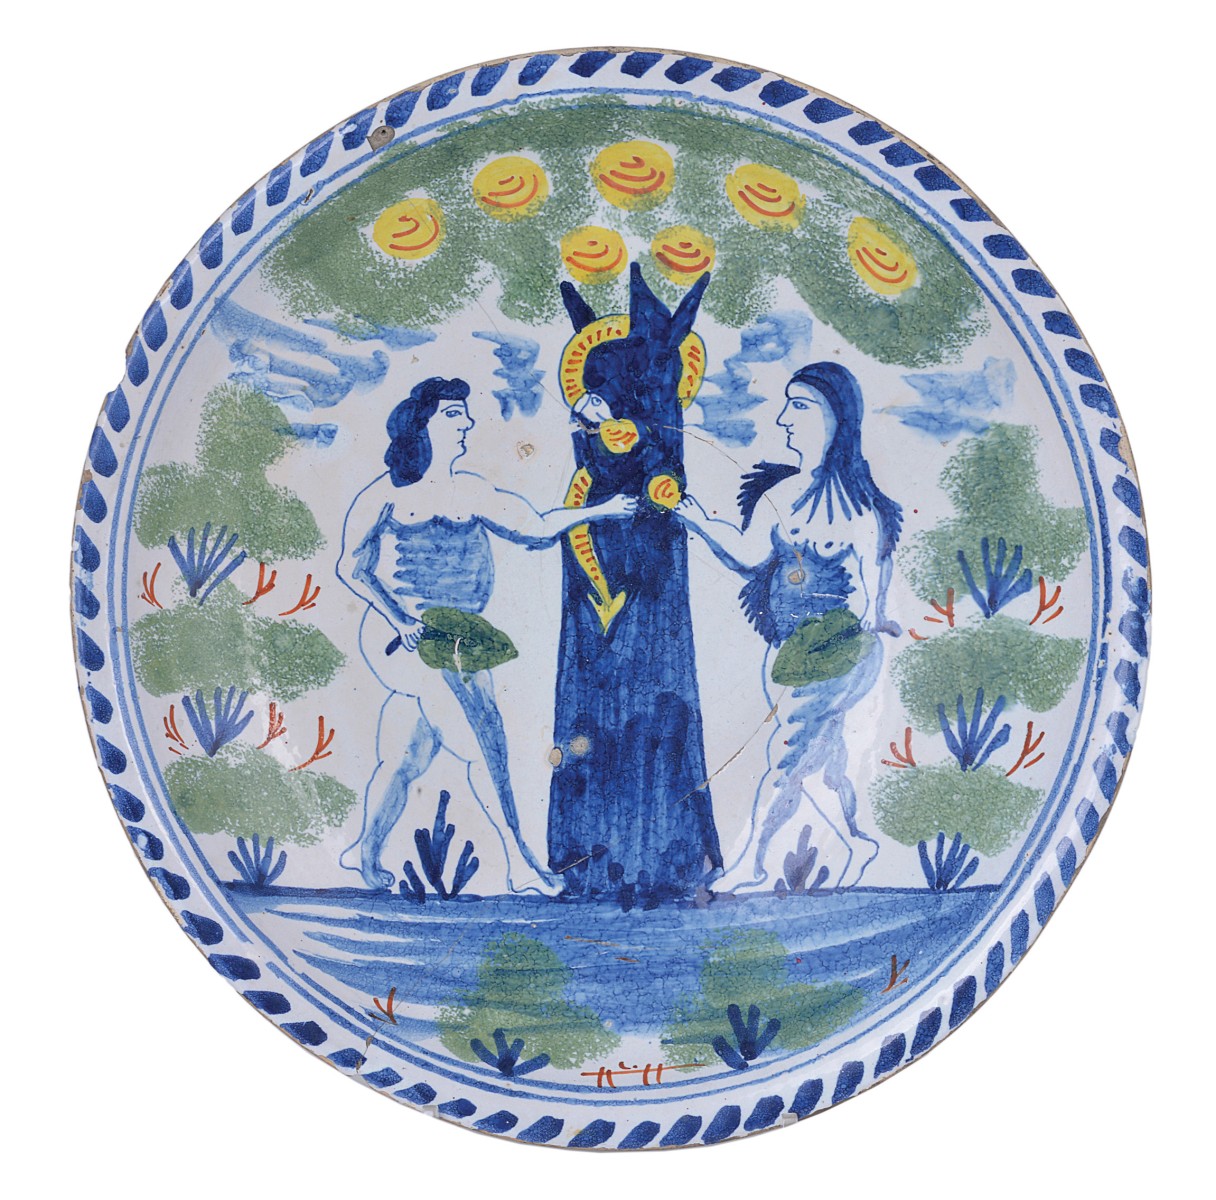 A BRISTOL DELFTWARE ADAM AND EVE CHARGER, EARLY 18TH CENTURY painted and sponged in blue, green,